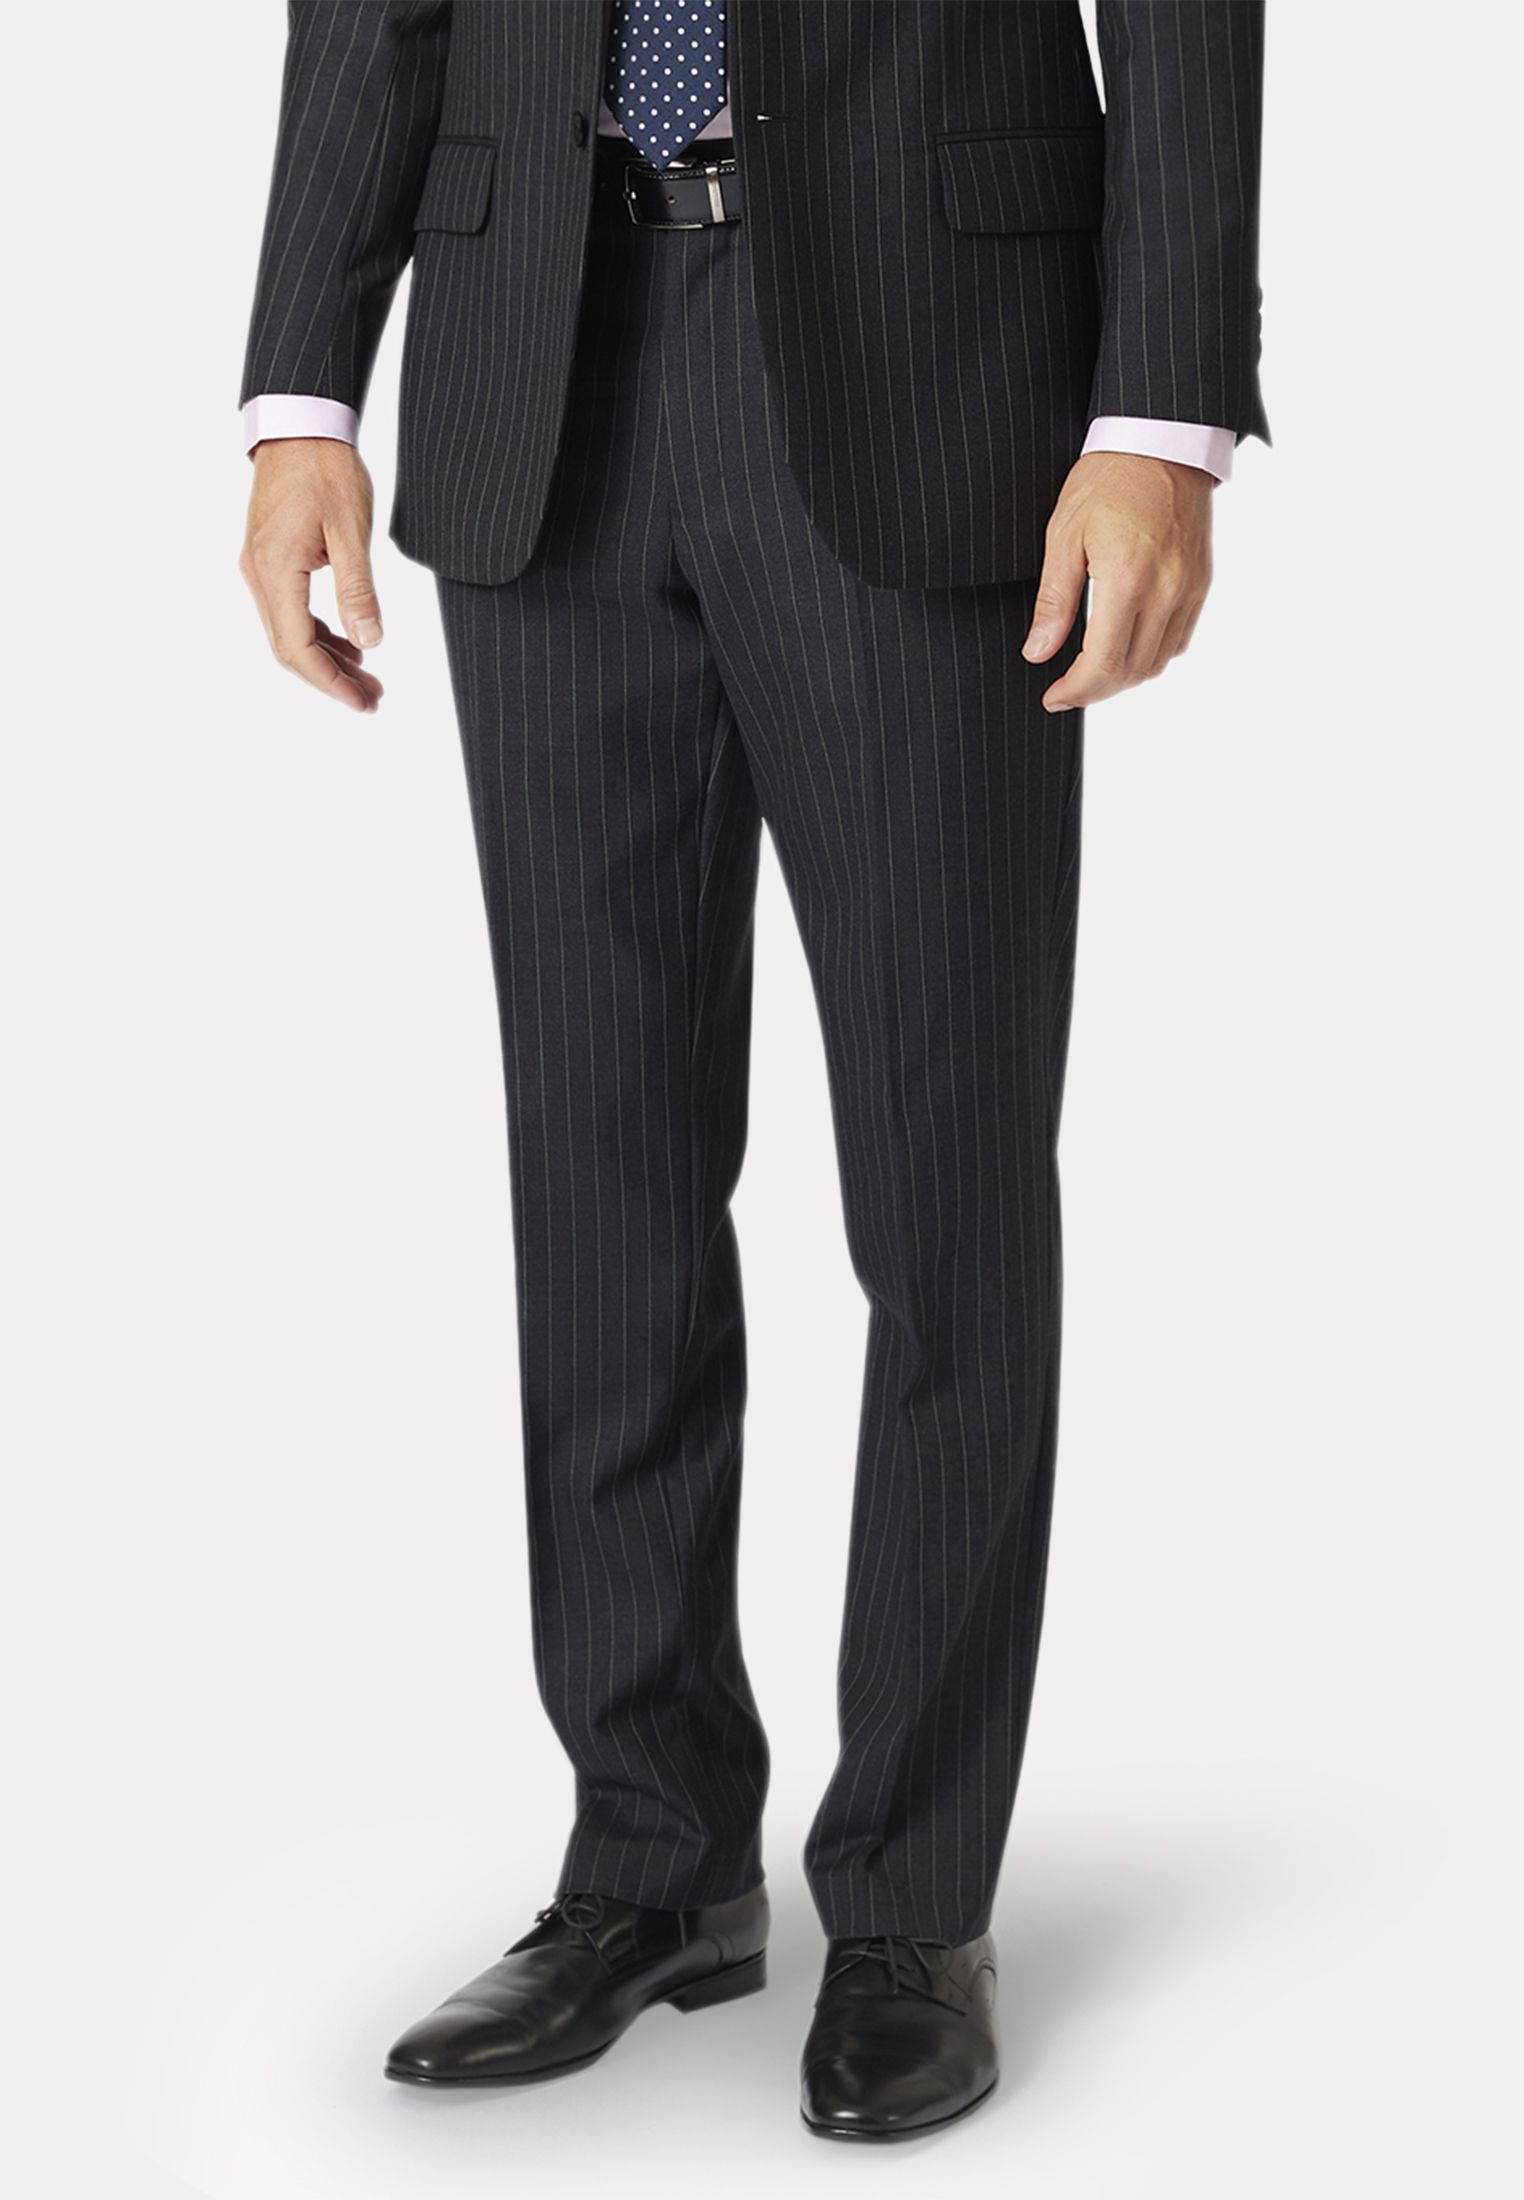 Italian style black morning dress in wool with pinstriped pants